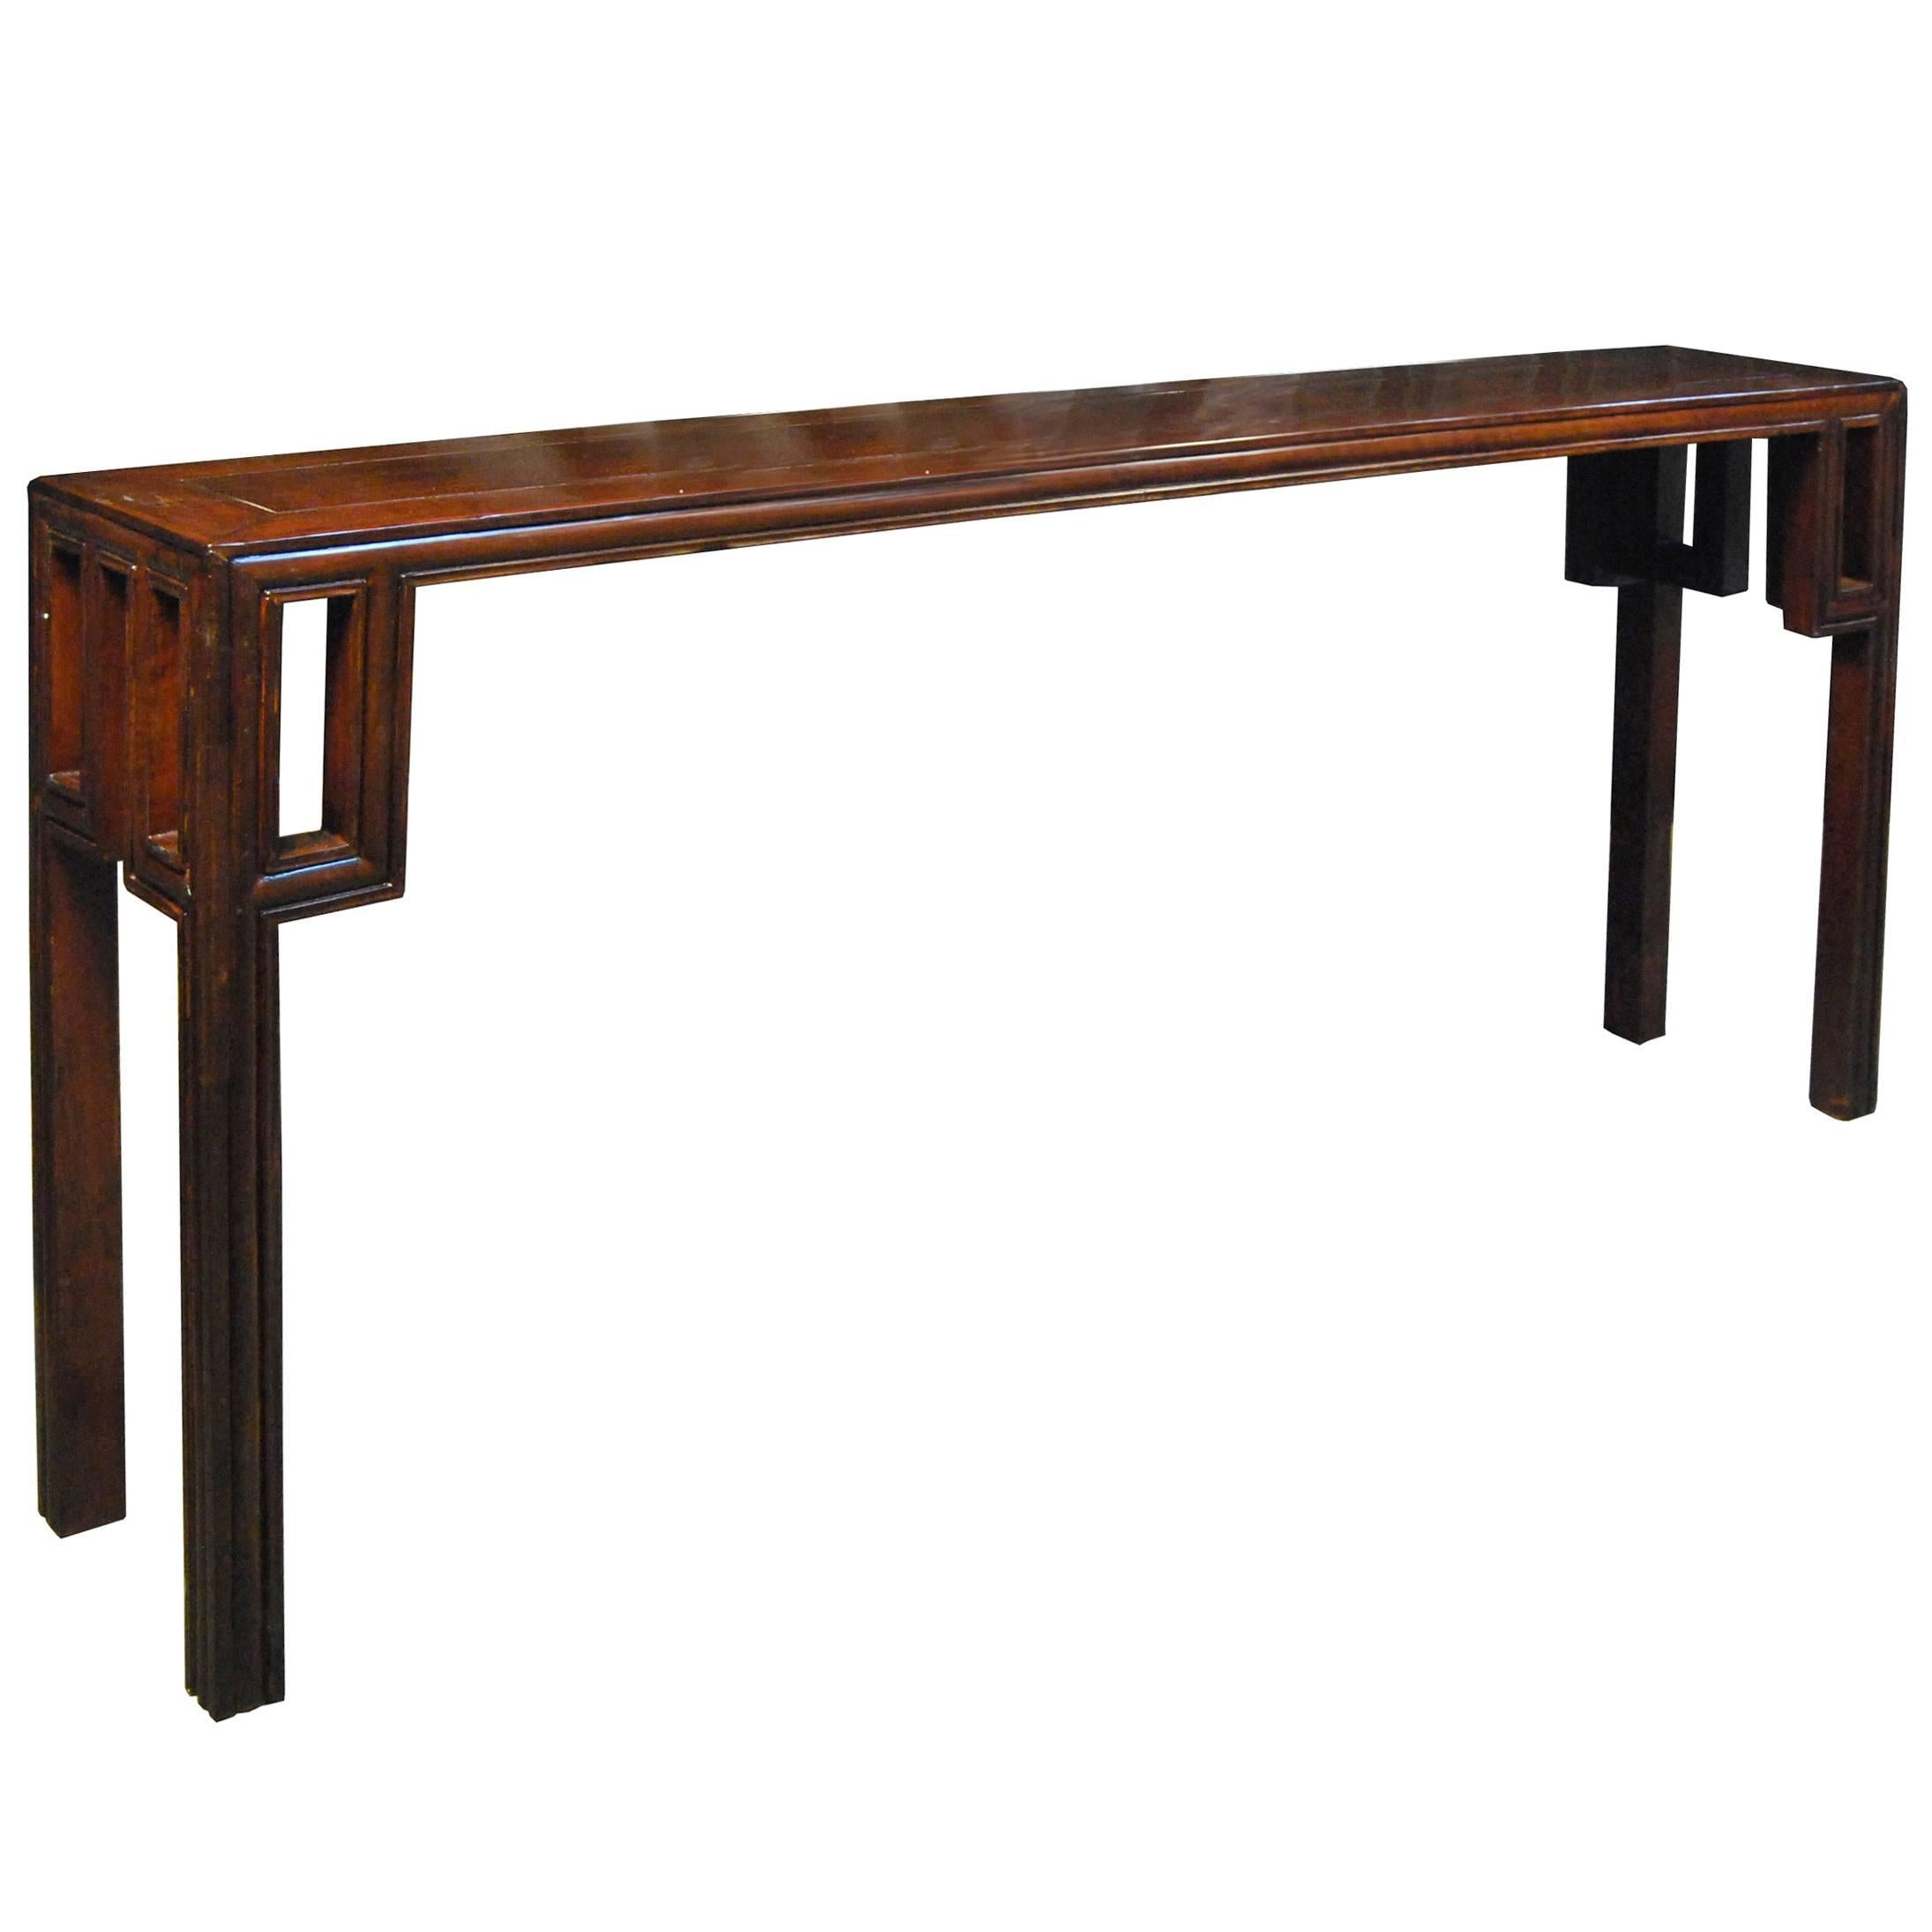 19th Century Chinese Altar Table with Square Spandrels